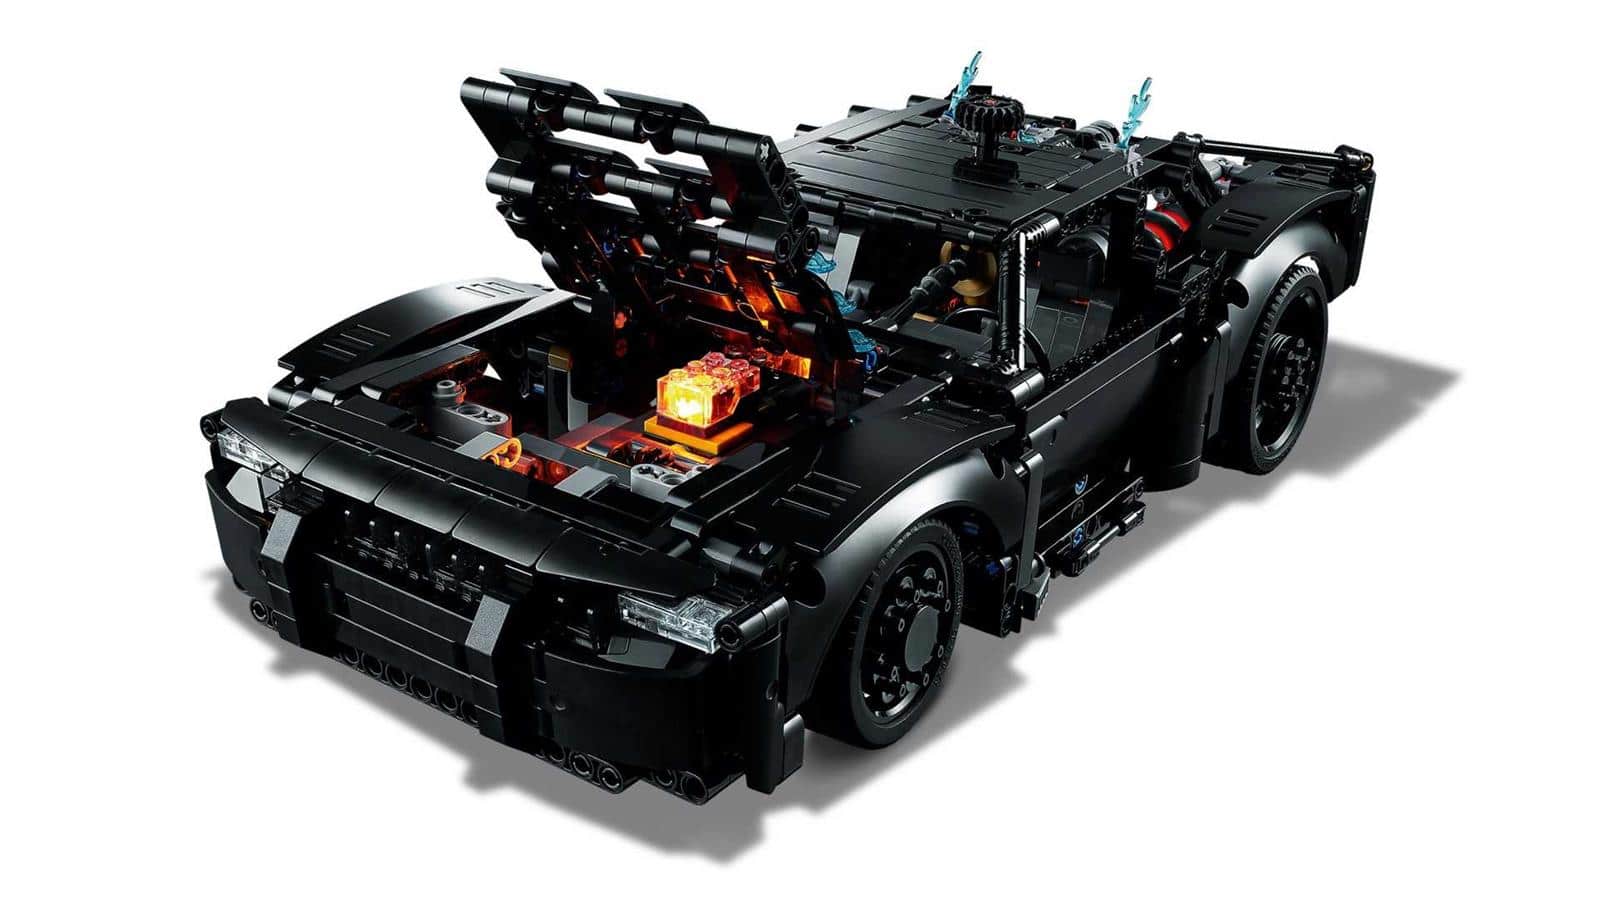 The new LEGO version of the Batmobile.  Take a look at a 1,360-piece set